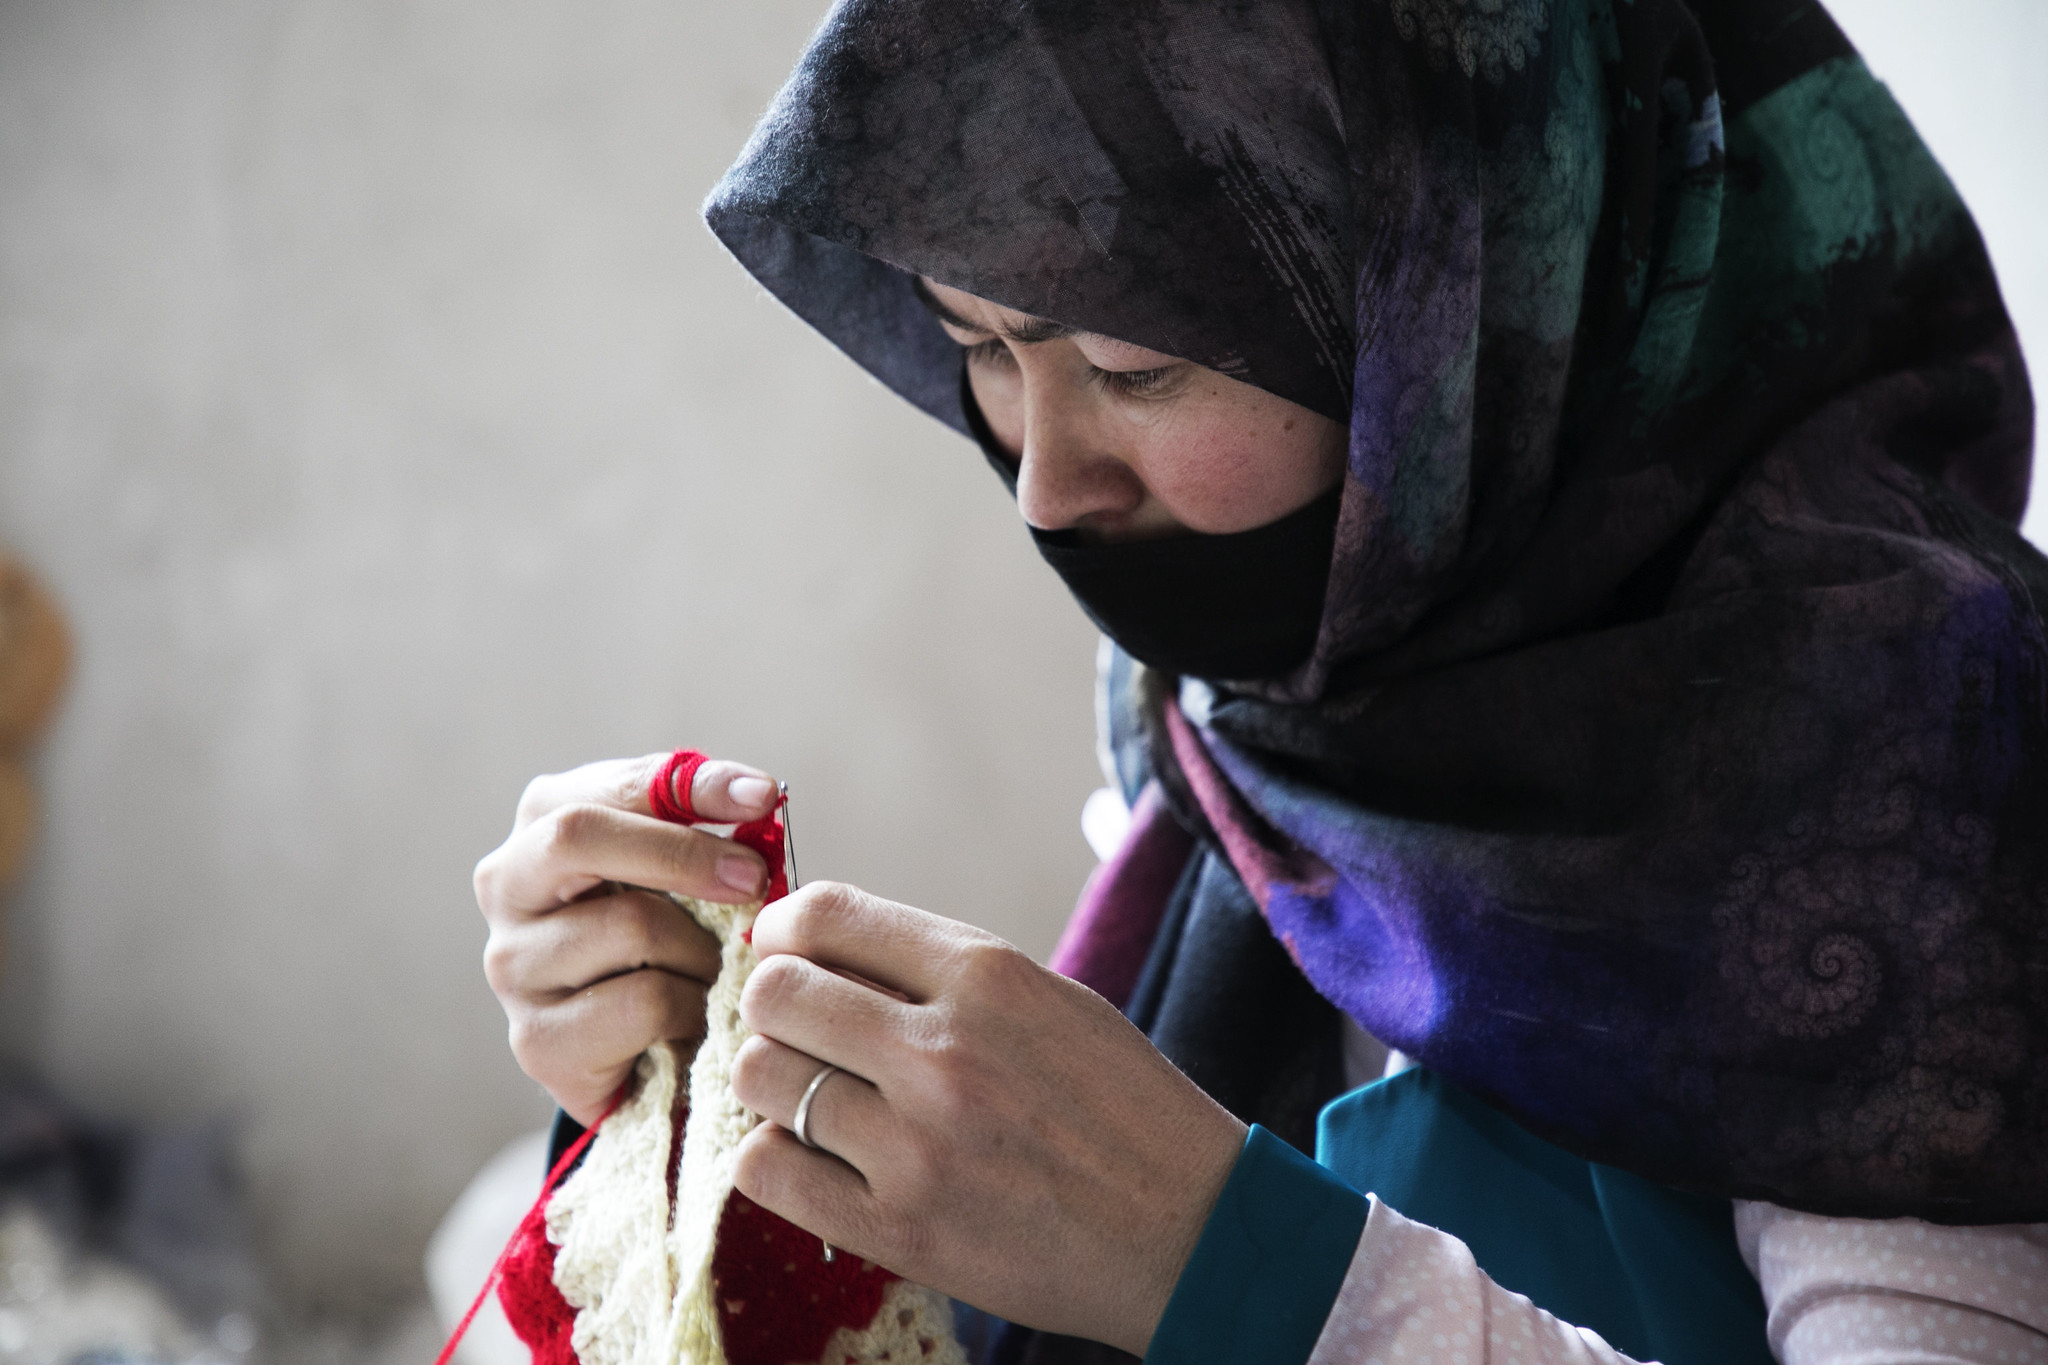 A women works at small tailoring business supported by UNDP in western Afghanistan. Credit: UNDP/Afghanistan